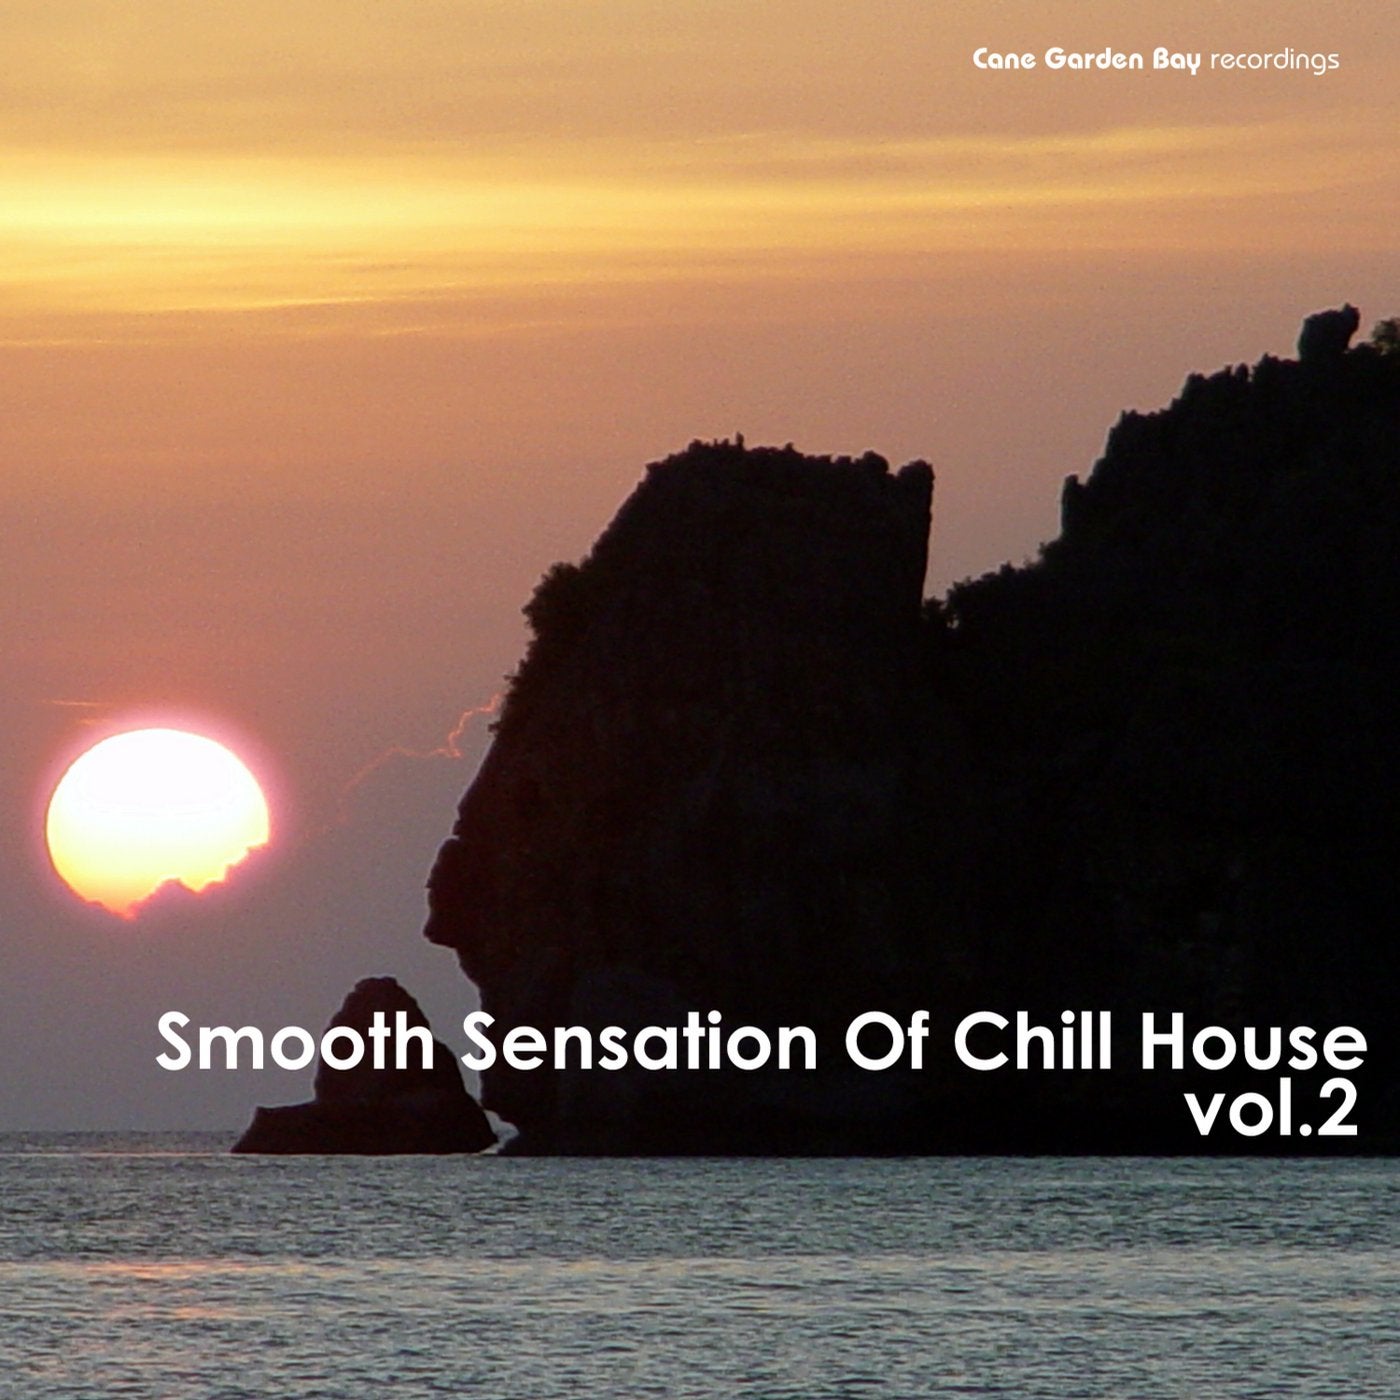 Smooth Sensation Of Chill House Vol.2